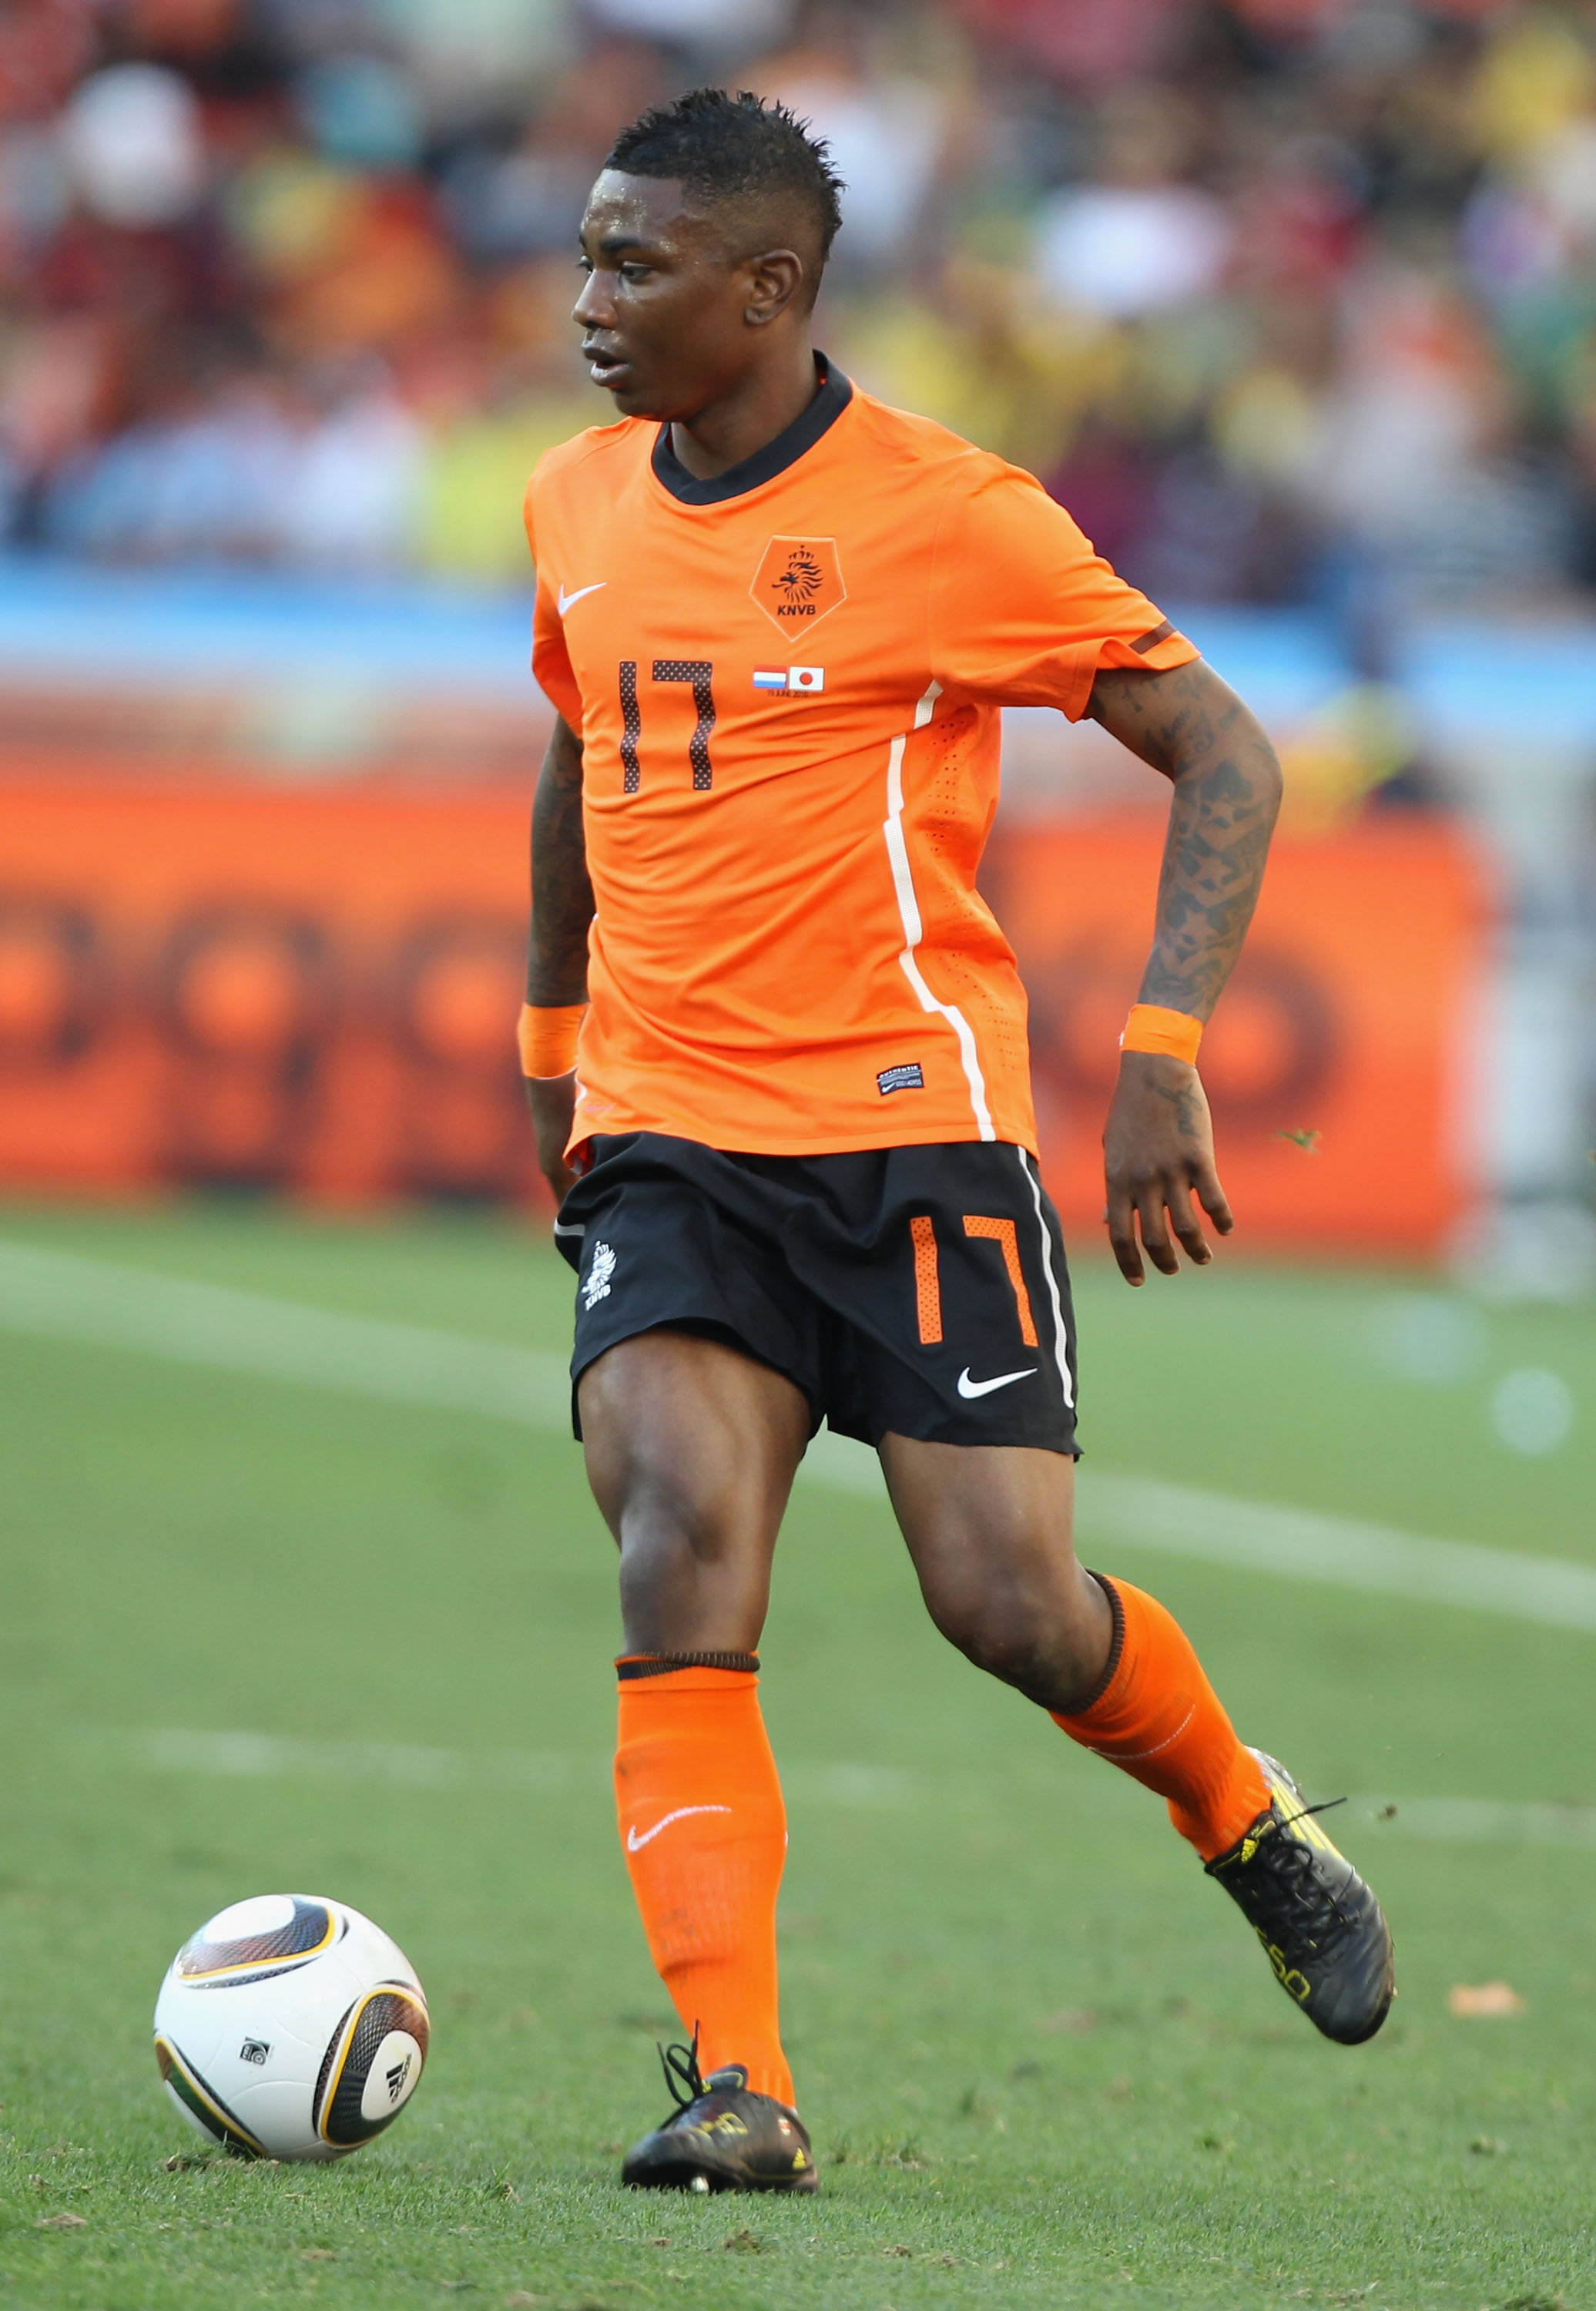 DURBAN, SOUTH AFRICA - JUNE 19: Eljero Elia of the Netherlands in action during the 2010 FIFA World Cup South Africa Group E match between Netherlands and Japan at Durban Stadium on June 19, 2010 in Durban, South Africa.  (Photo by Ian Walton/Getty Images